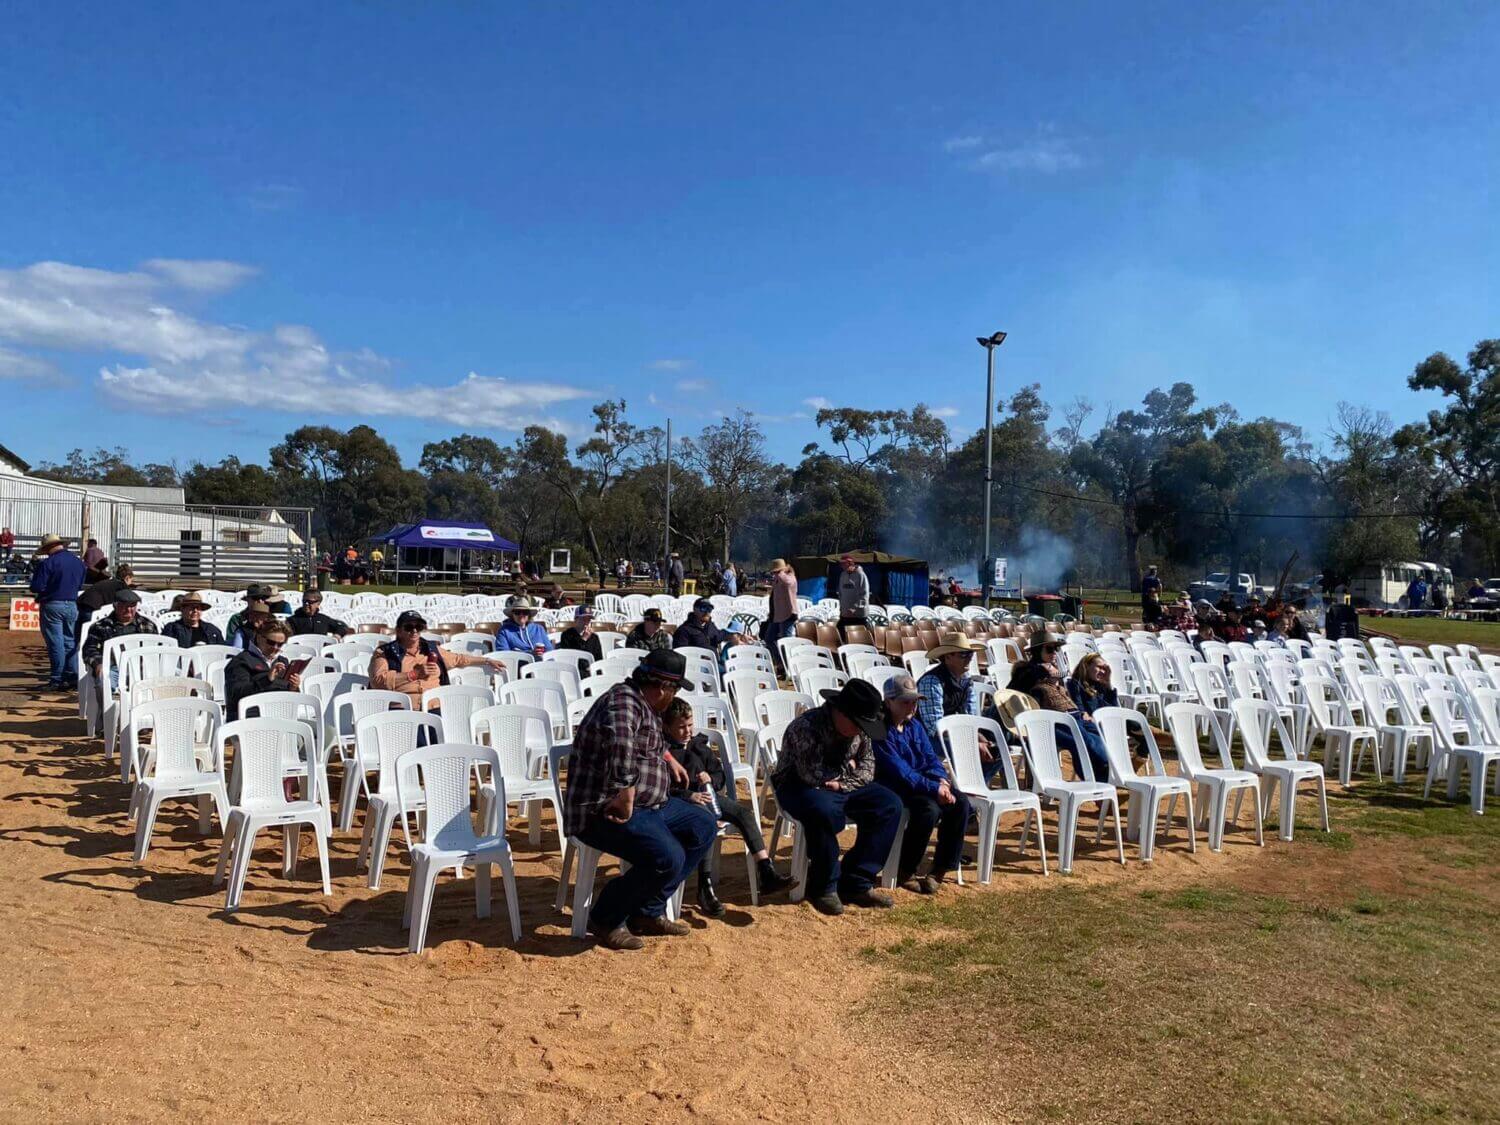 A small crowd gathered at the chairs, ready for a day full of fun. Image Credit: All Occasions Event Hosting Facebook Page.